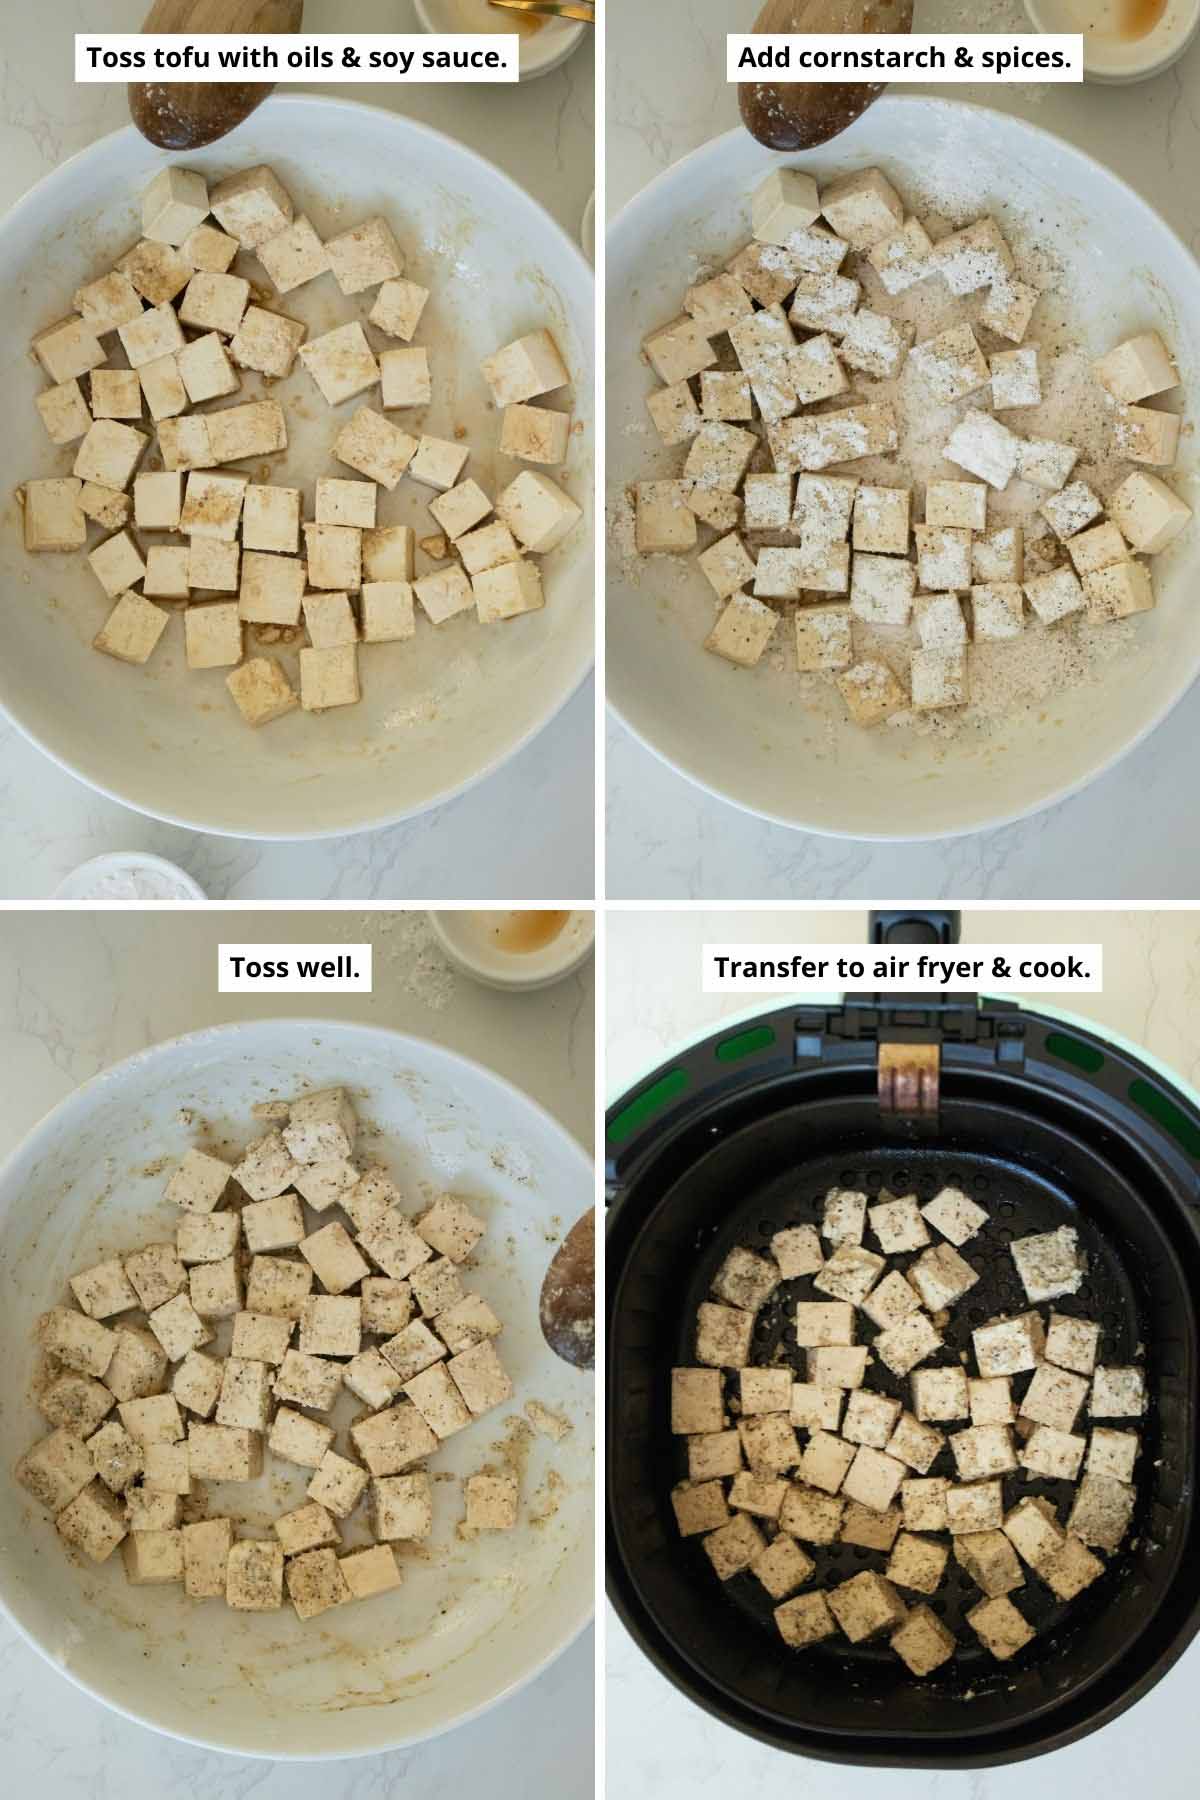 image collage showing tossing the tofu in oils/soy sauce and in cornstarch/spices and then arranged in the air fryer basket